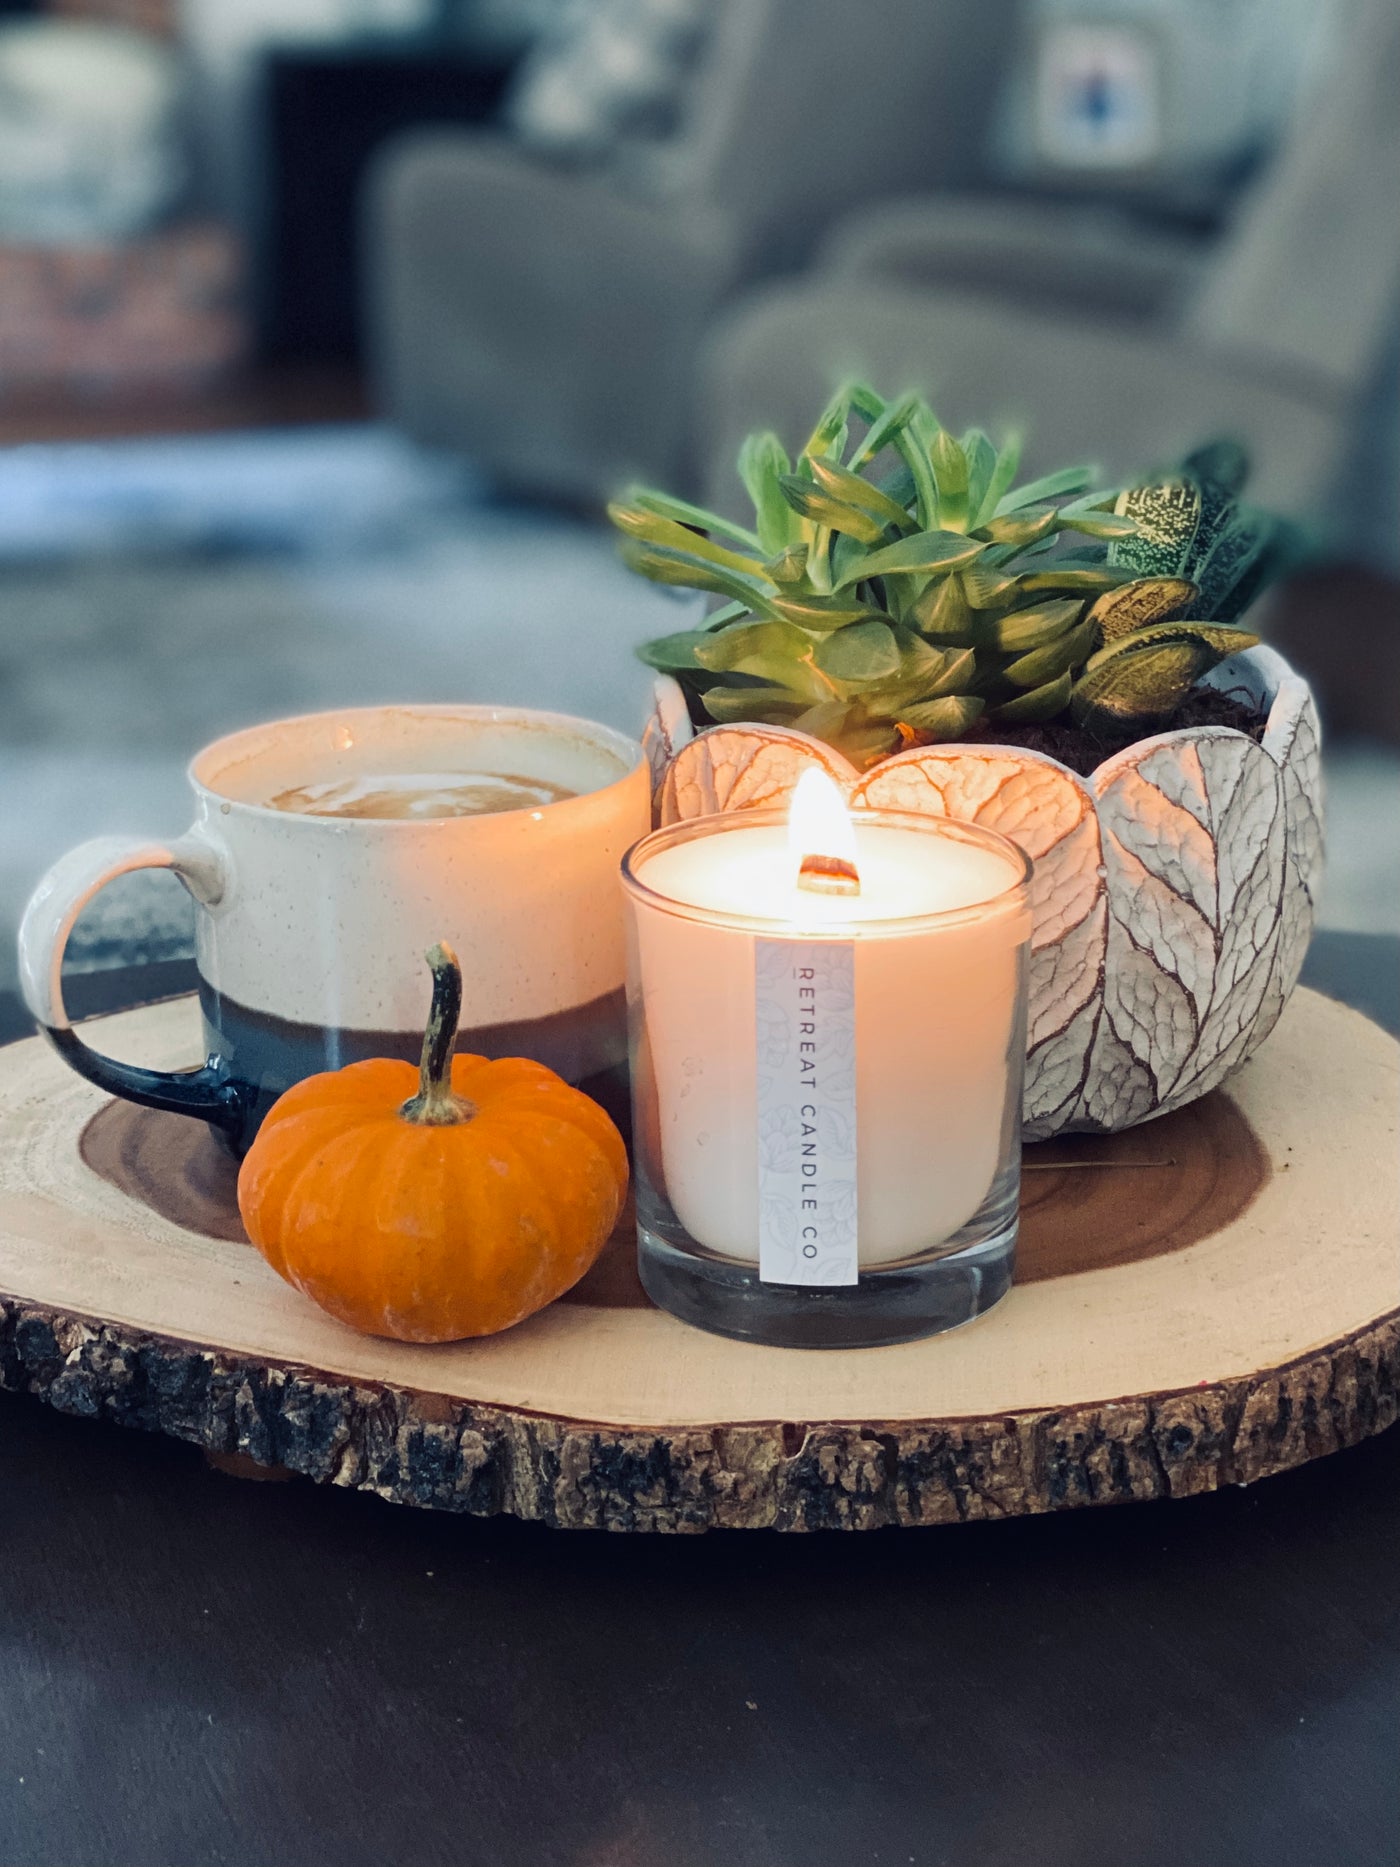 Eucalyptus Candle - #CandlesForACause - Partial proceeds of this candle gives back to kids mental health. Vegan. All-natural soy and coconut wax. Phthalate-free fragrances. Crackling wooden wick, and a seed paper bookmark to plant in your candle jar after. Feel good about what you buy. 